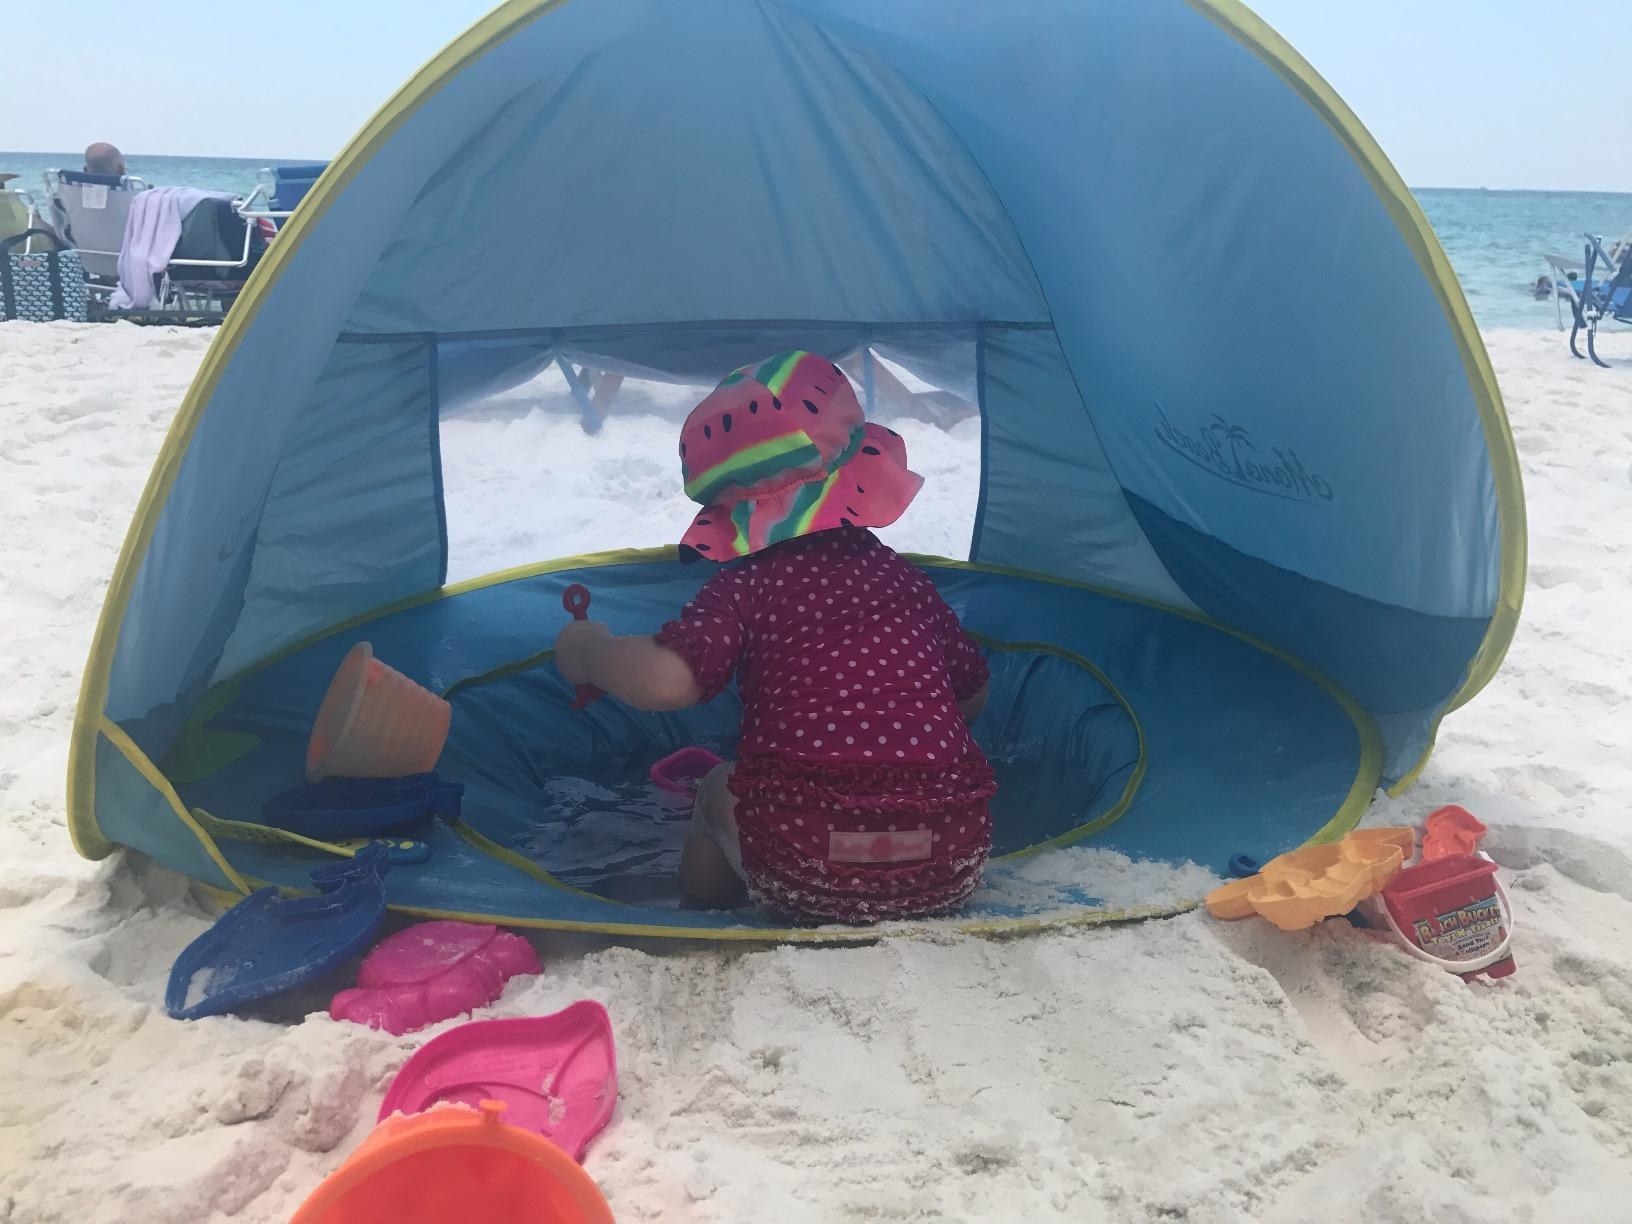 A baby playing in the tent wading pool on the beach